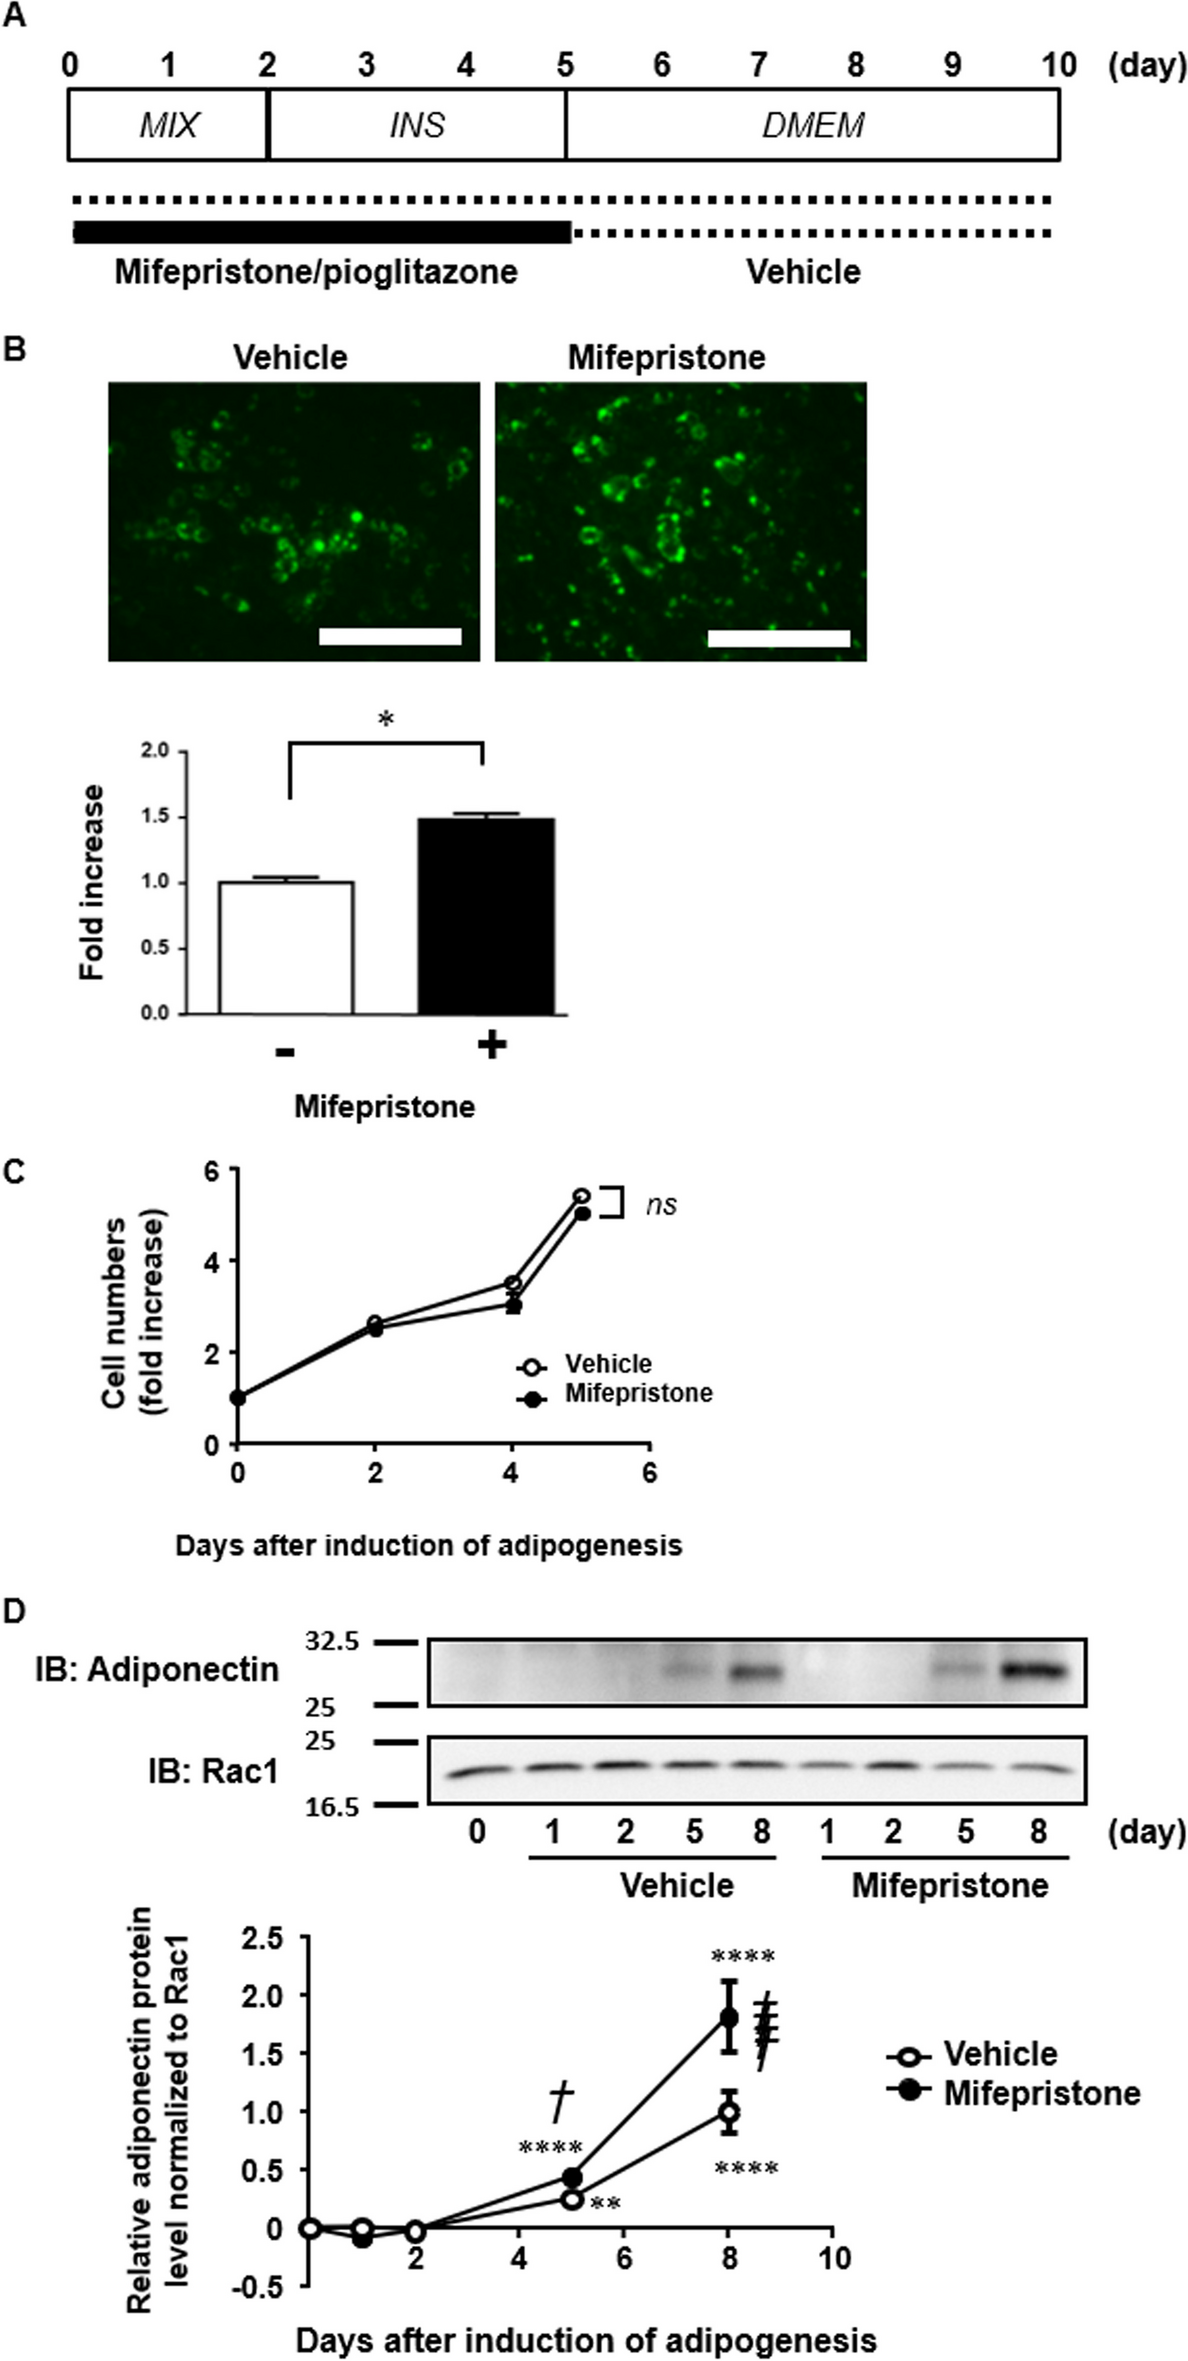 Effects of mifepristone on adipocyte differentiation in mouse 3T3-L1 cells